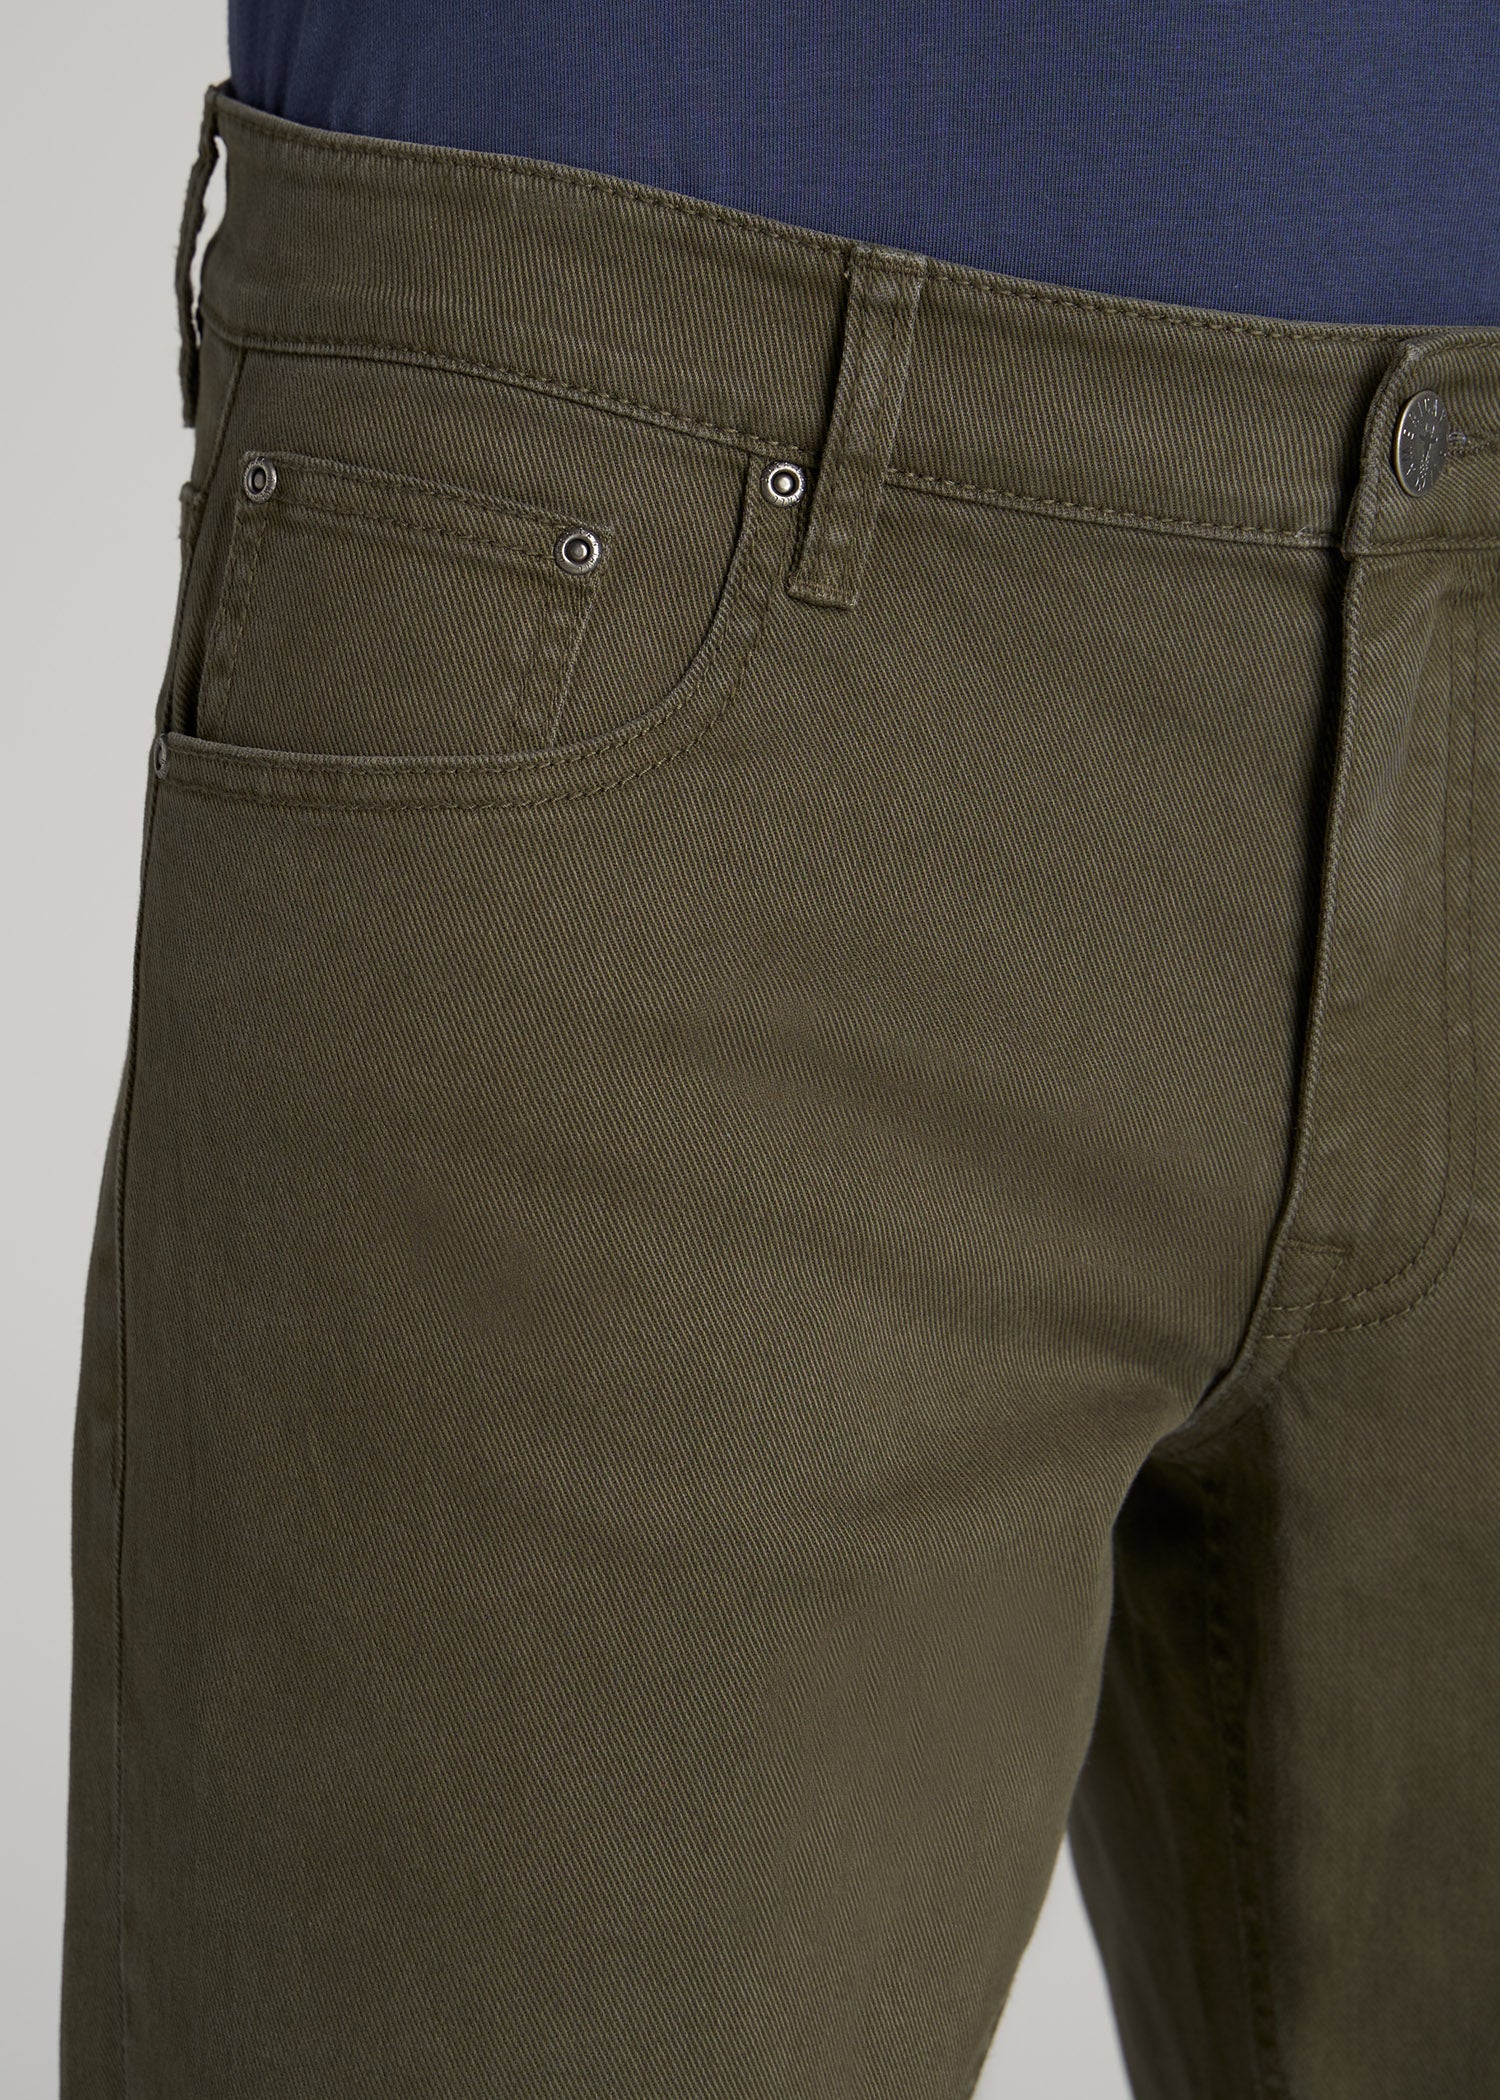 Carman Tapered Jeans For Tall Men Olive Green Wash | American Tall